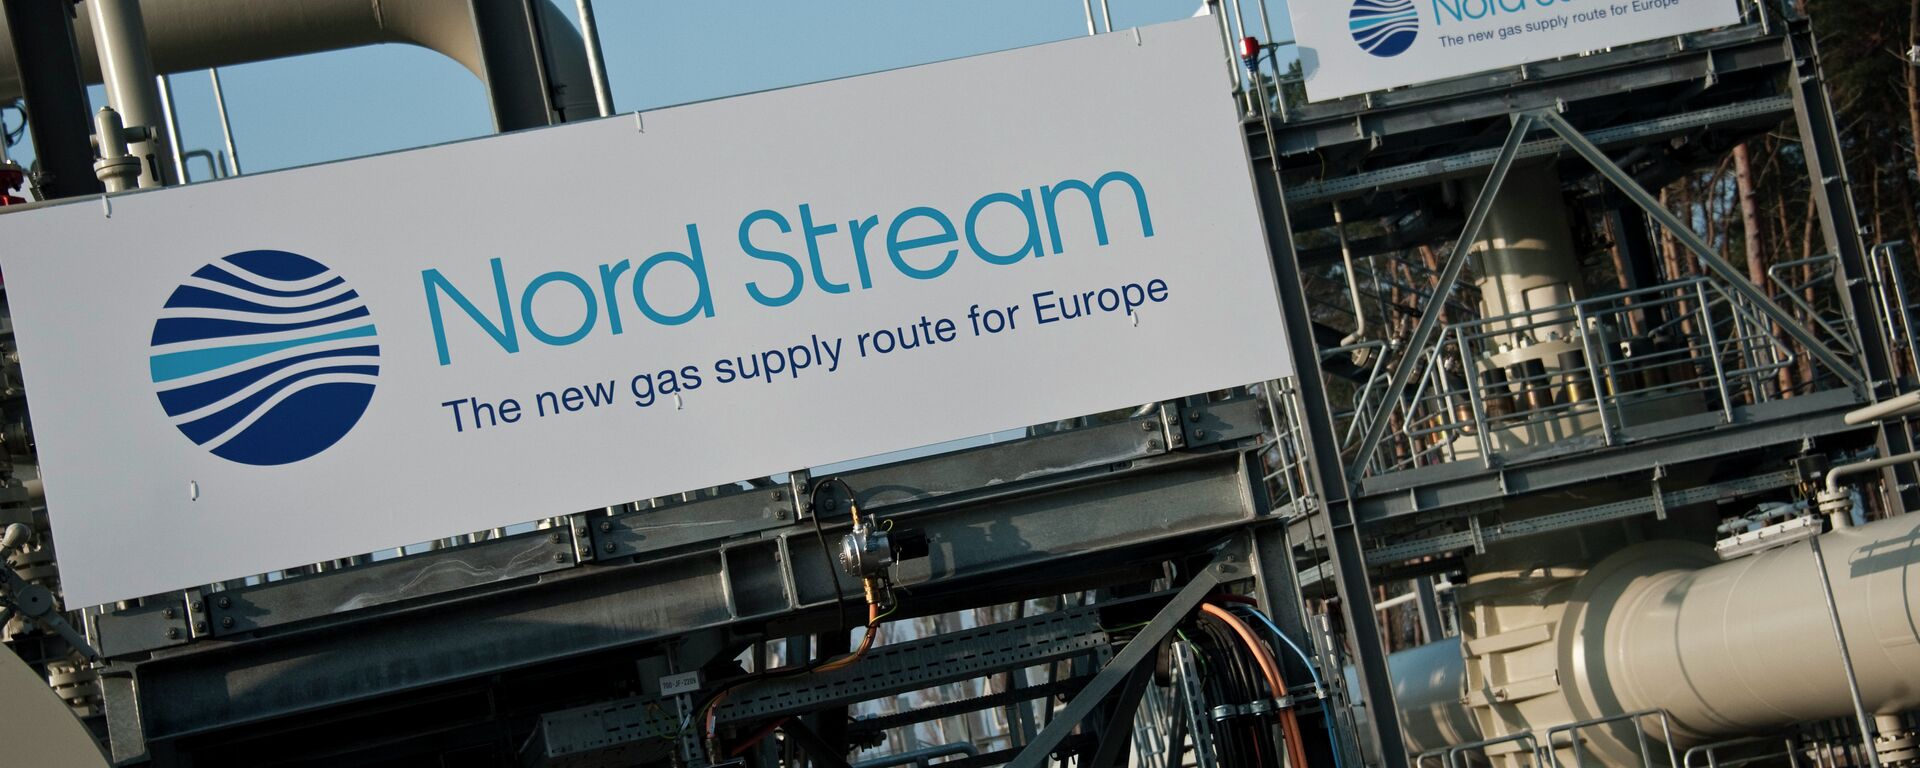 View of the Nordstream gas pipeline terminal prior to an inaugural ceremony for the first of Nord Stream's twin 1,224 kilometre gas pipeline through the baltic sea, in Lubmin November 8, 2011 - Sputnik International, 1920, 16.03.2022